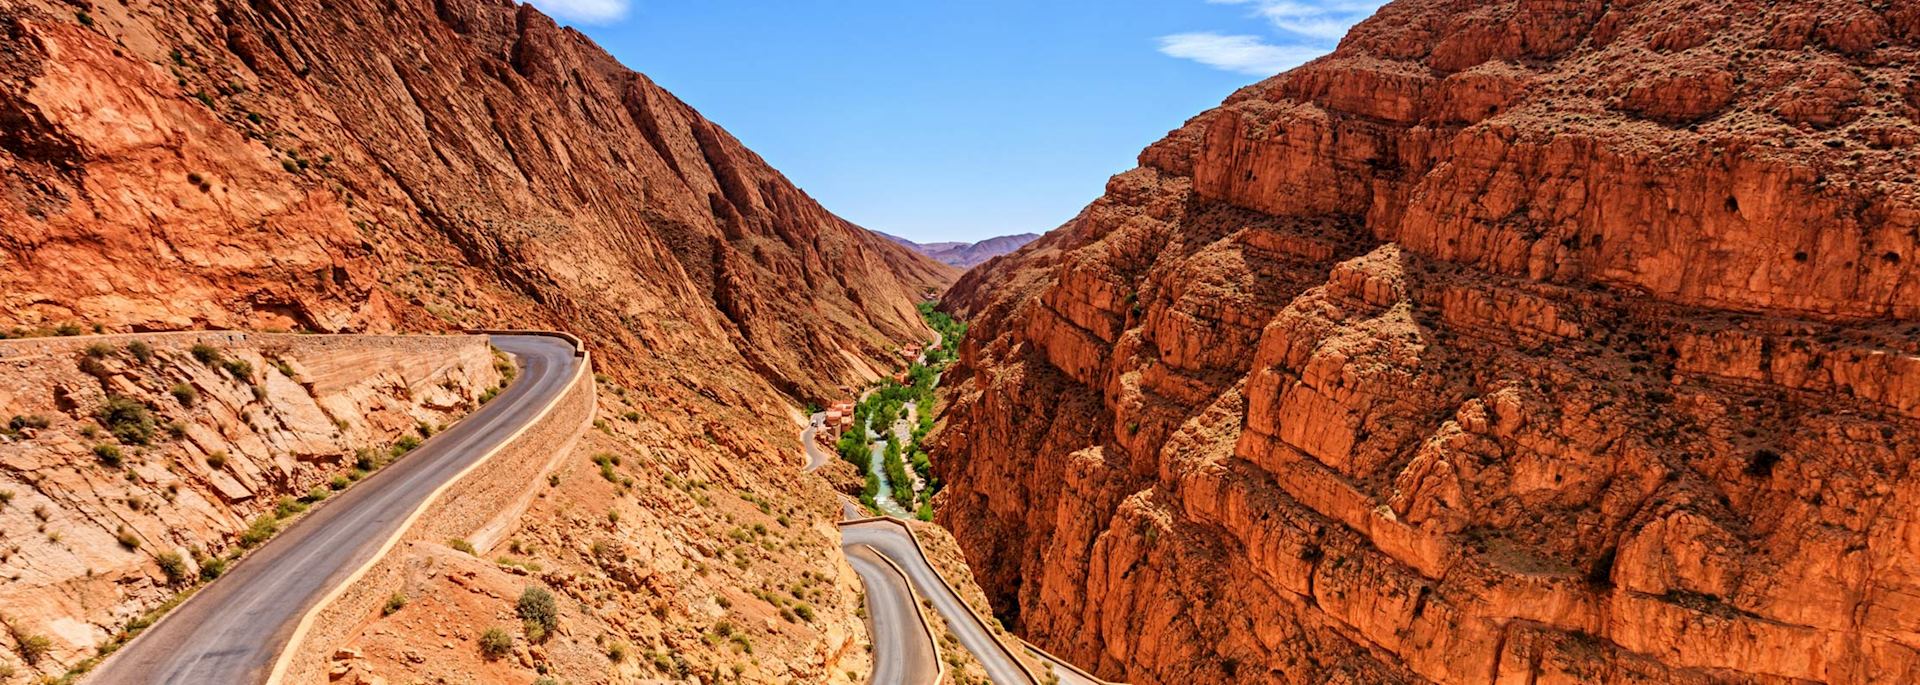 Road in the Dades Valley